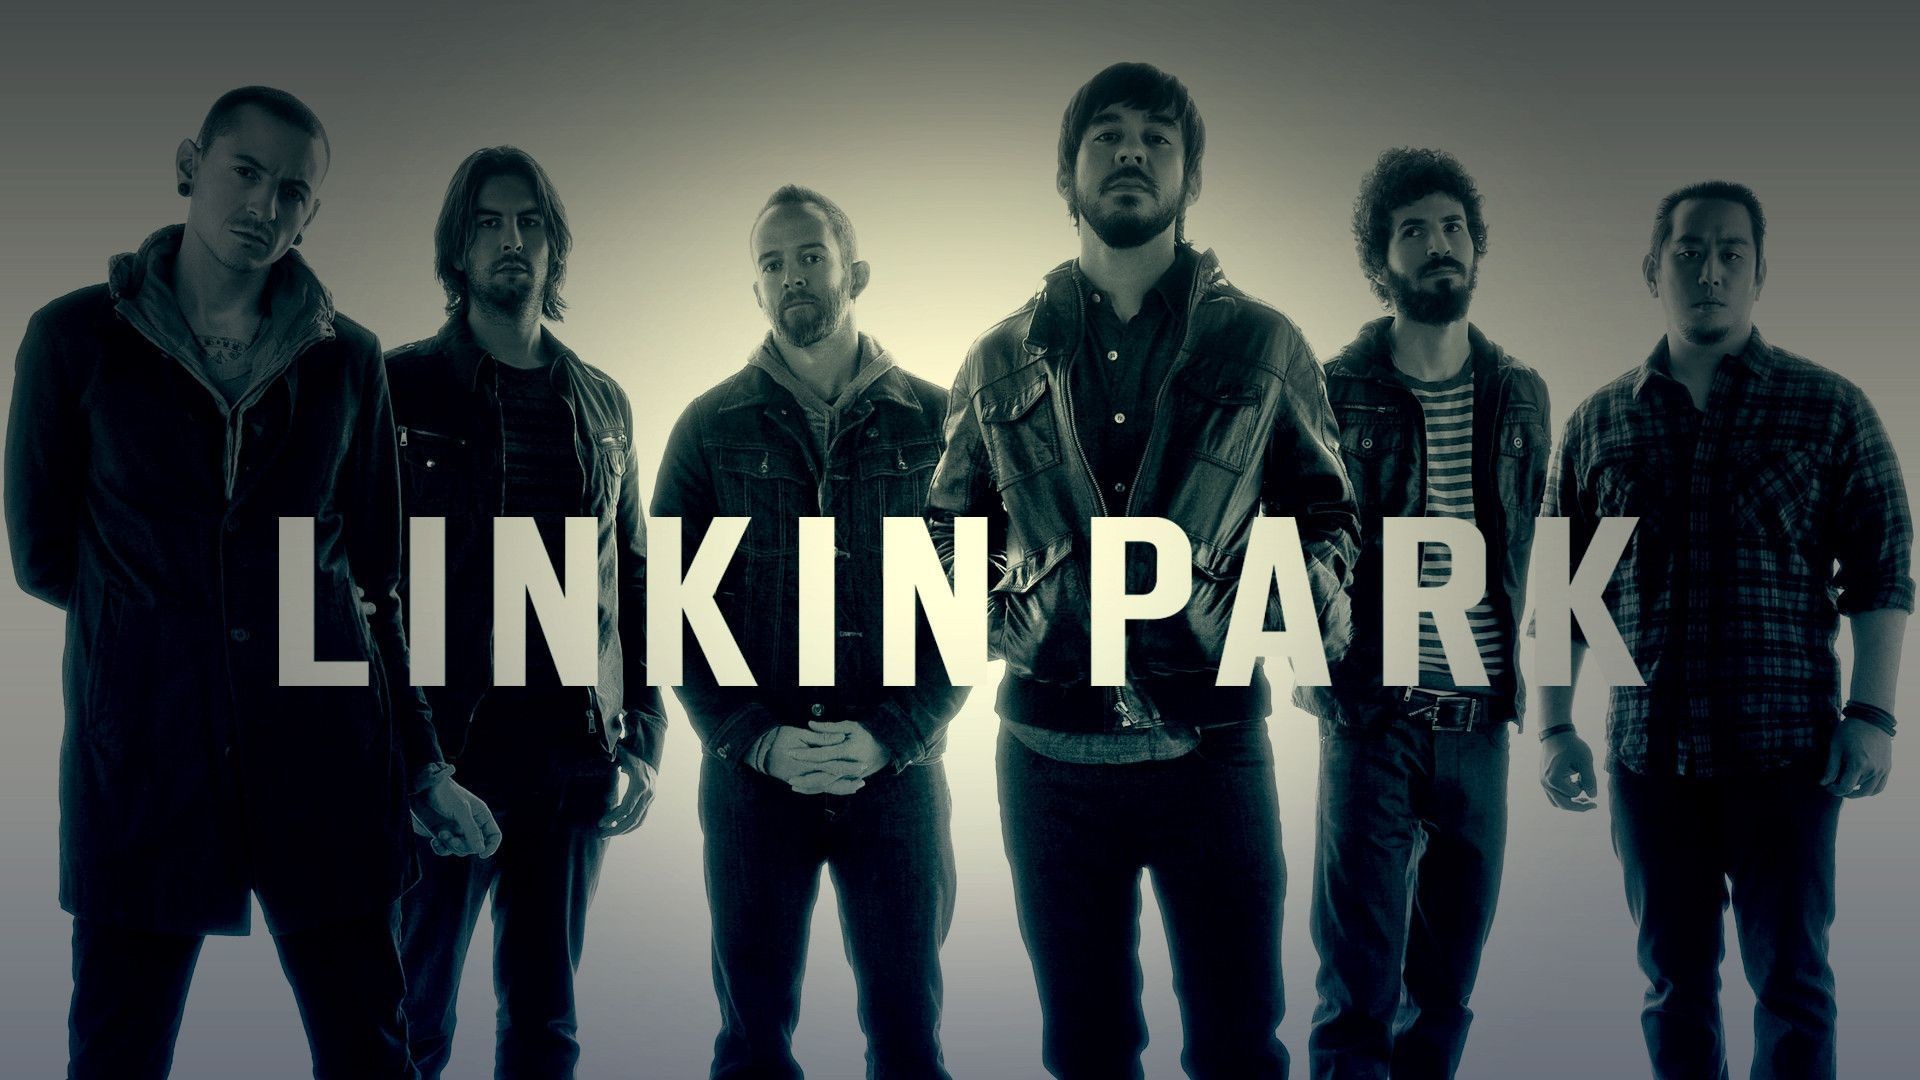 1920x1080 Linkin Park Wallpapers Pictures 1920Ã1080 Linkin Park Wallpapers High  Resolution (49 Wallpapers)